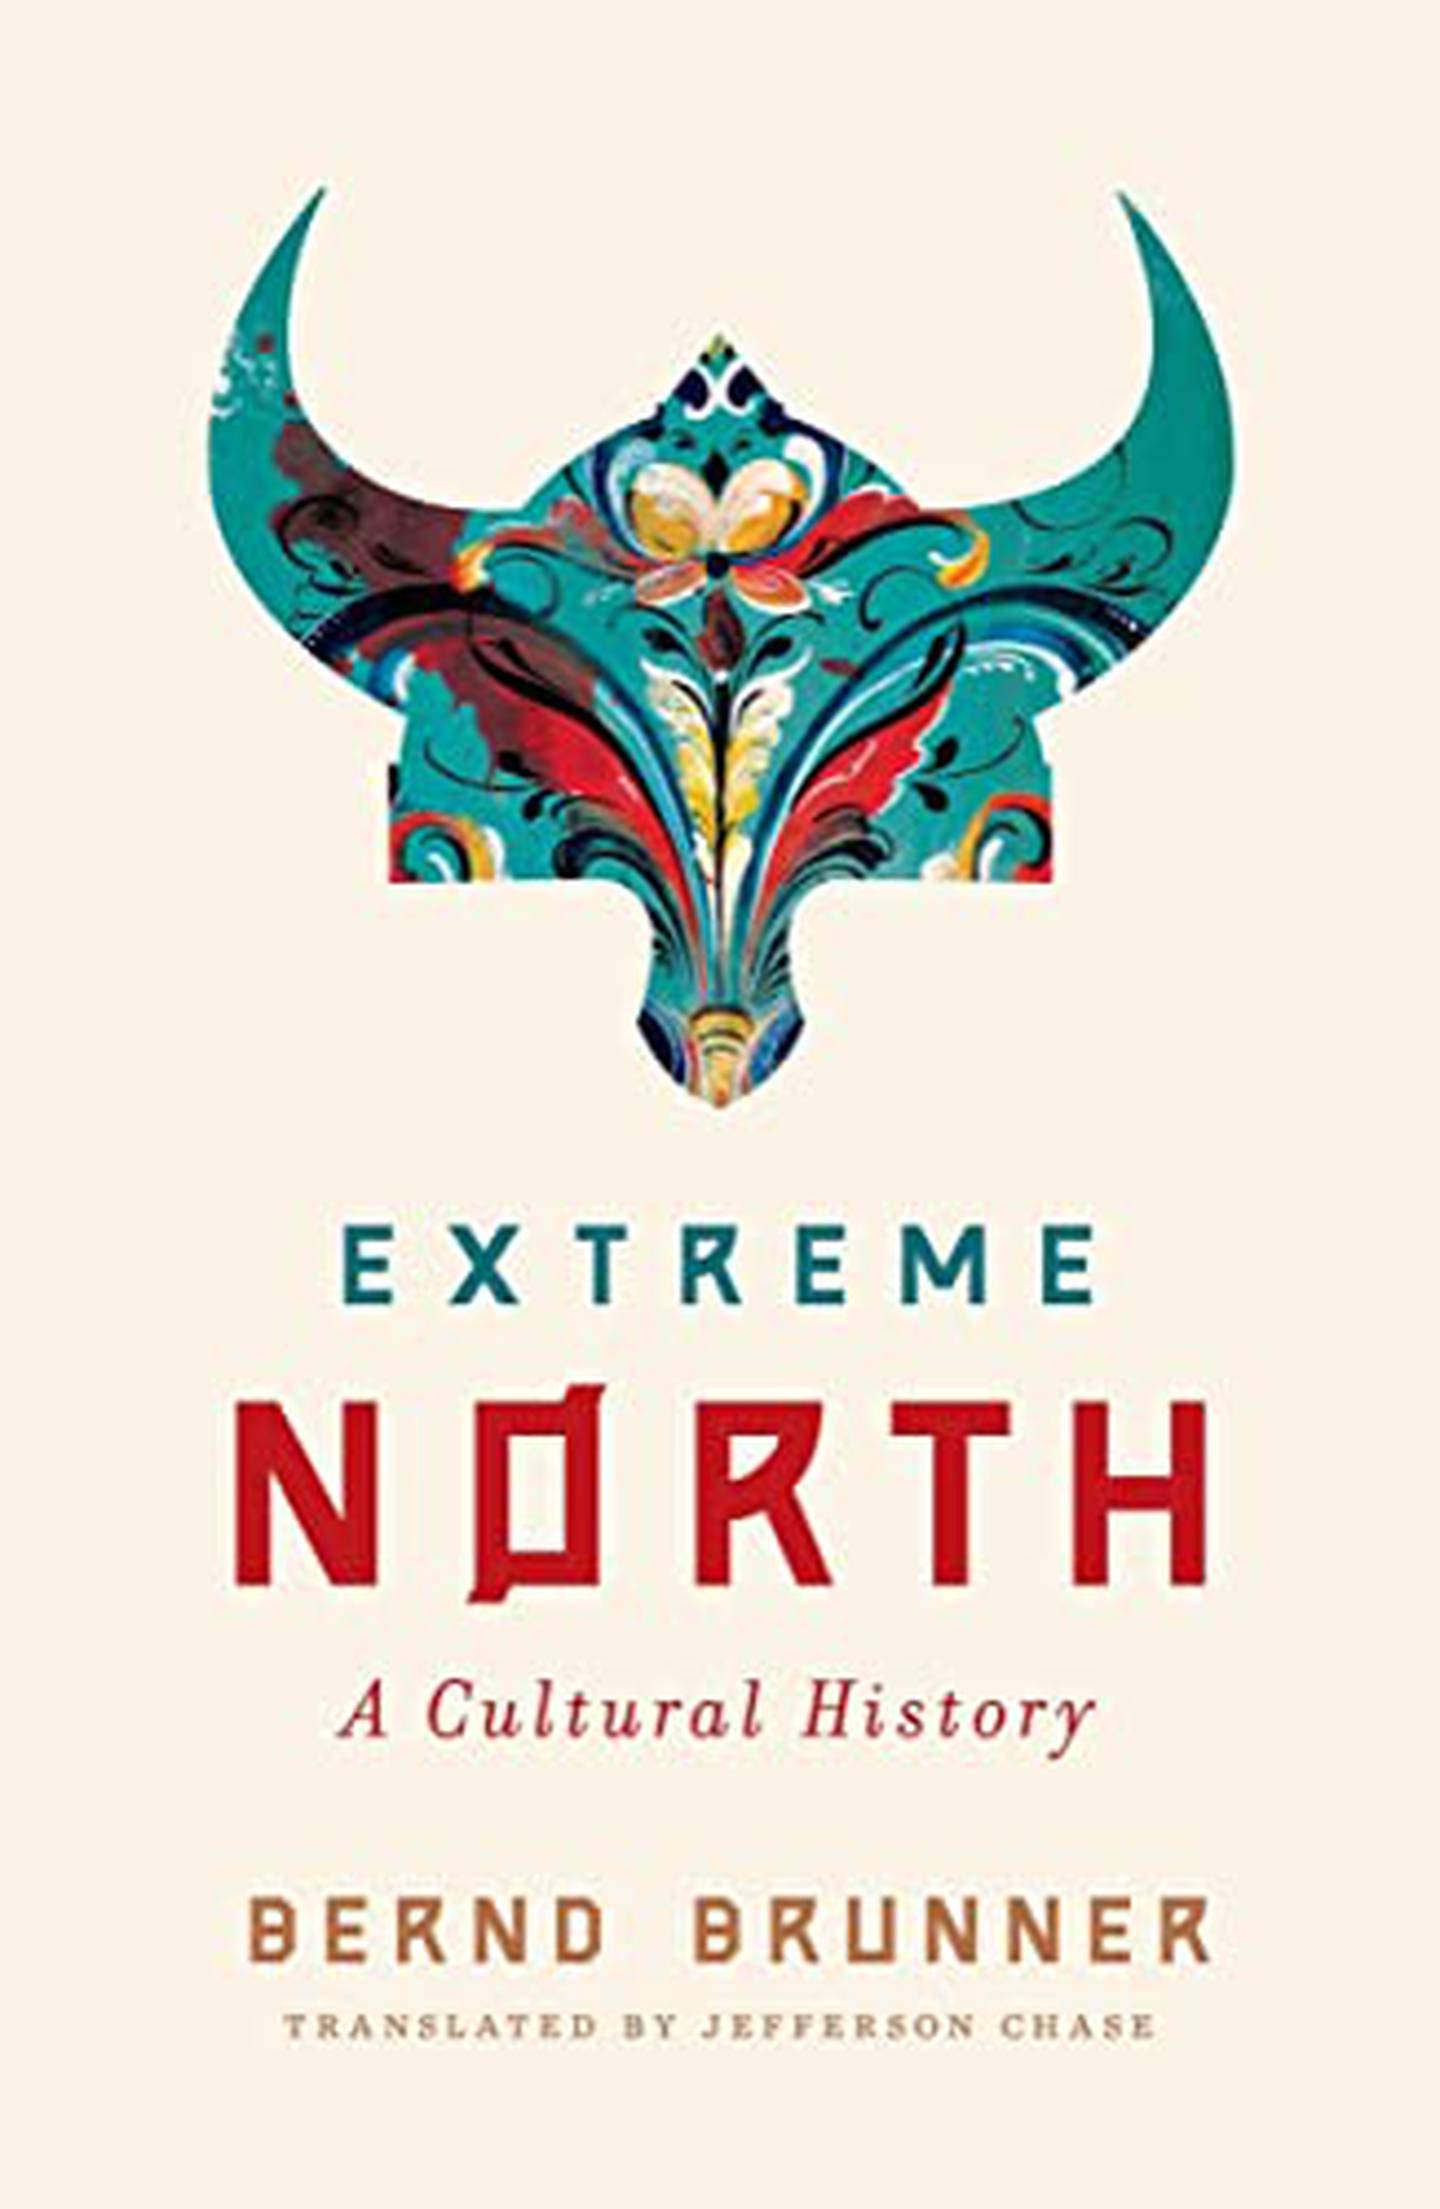 “Extreme North: A Cultural History,” by Bernd Brunner